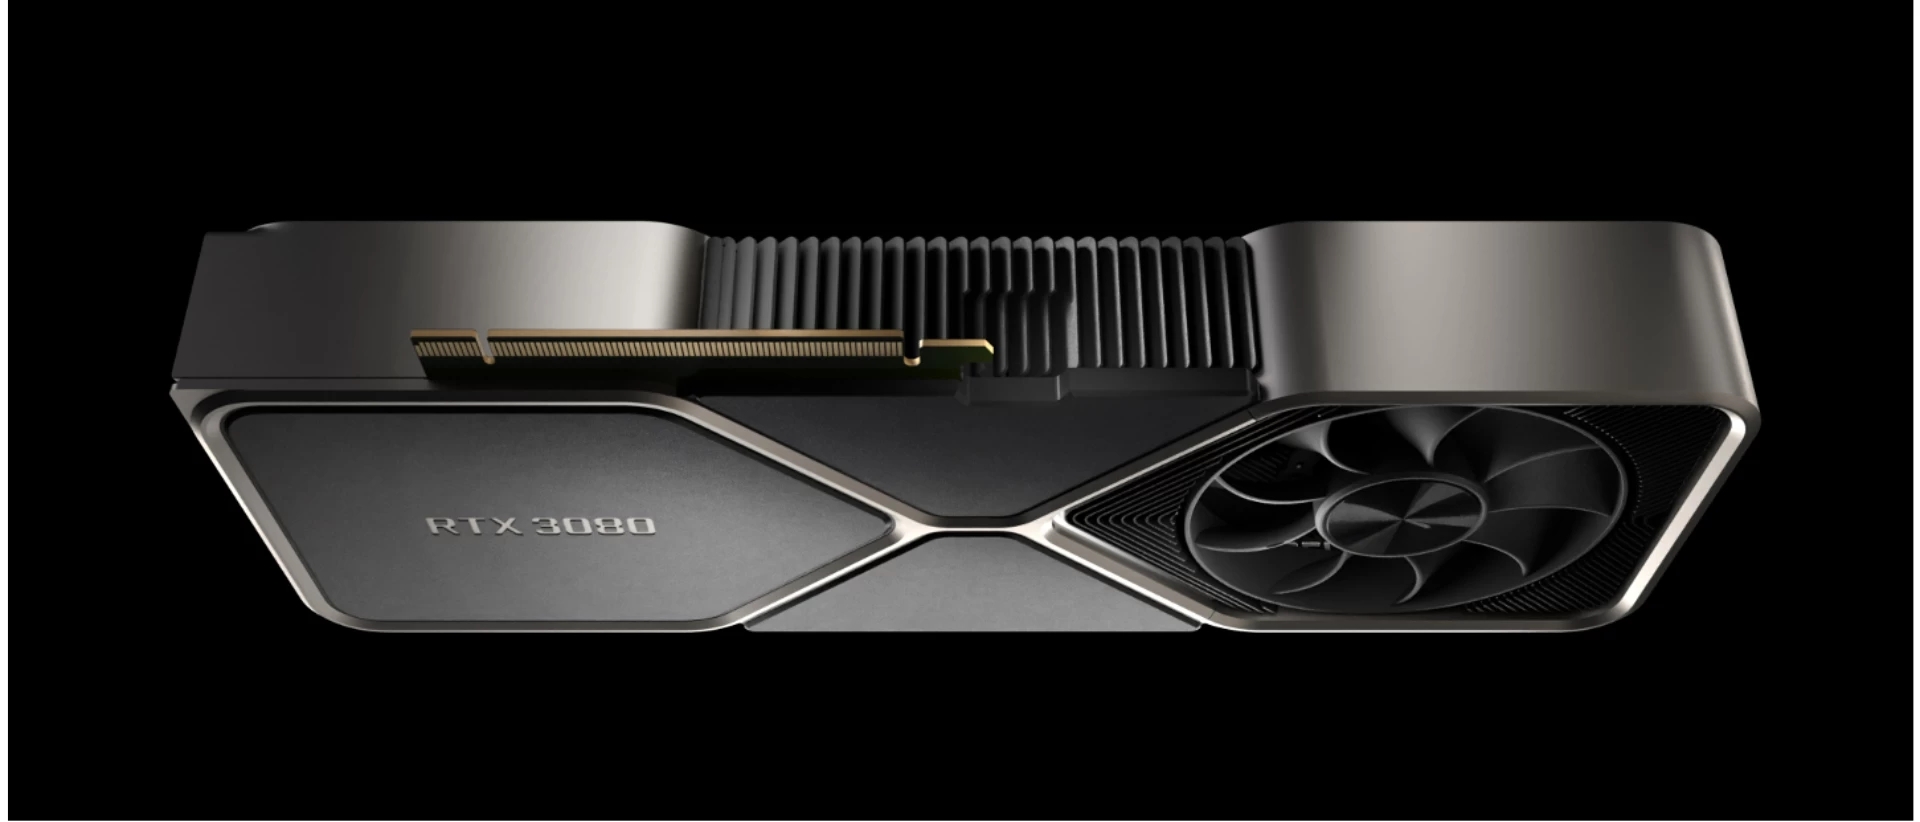 AMD Says More VRAM Matters In Modern Games Ahead of NVIDIA's RTX